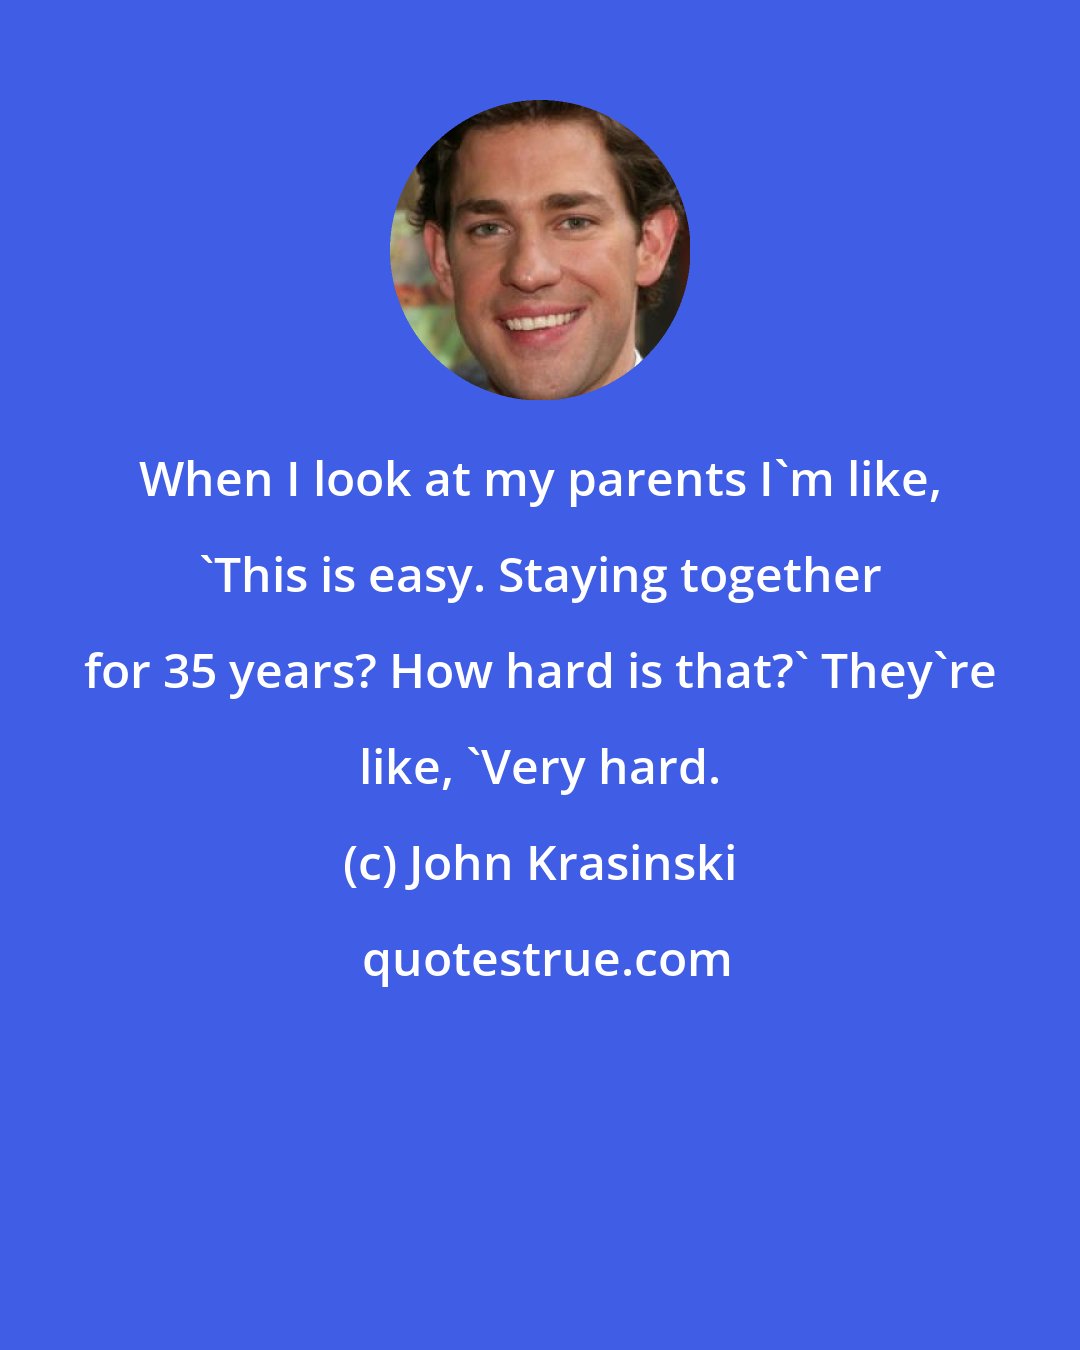 John Krasinski: When I look at my parents I'm like, 'This is easy. Staying together for 35 years? How hard is that?' They're like, 'Very hard.